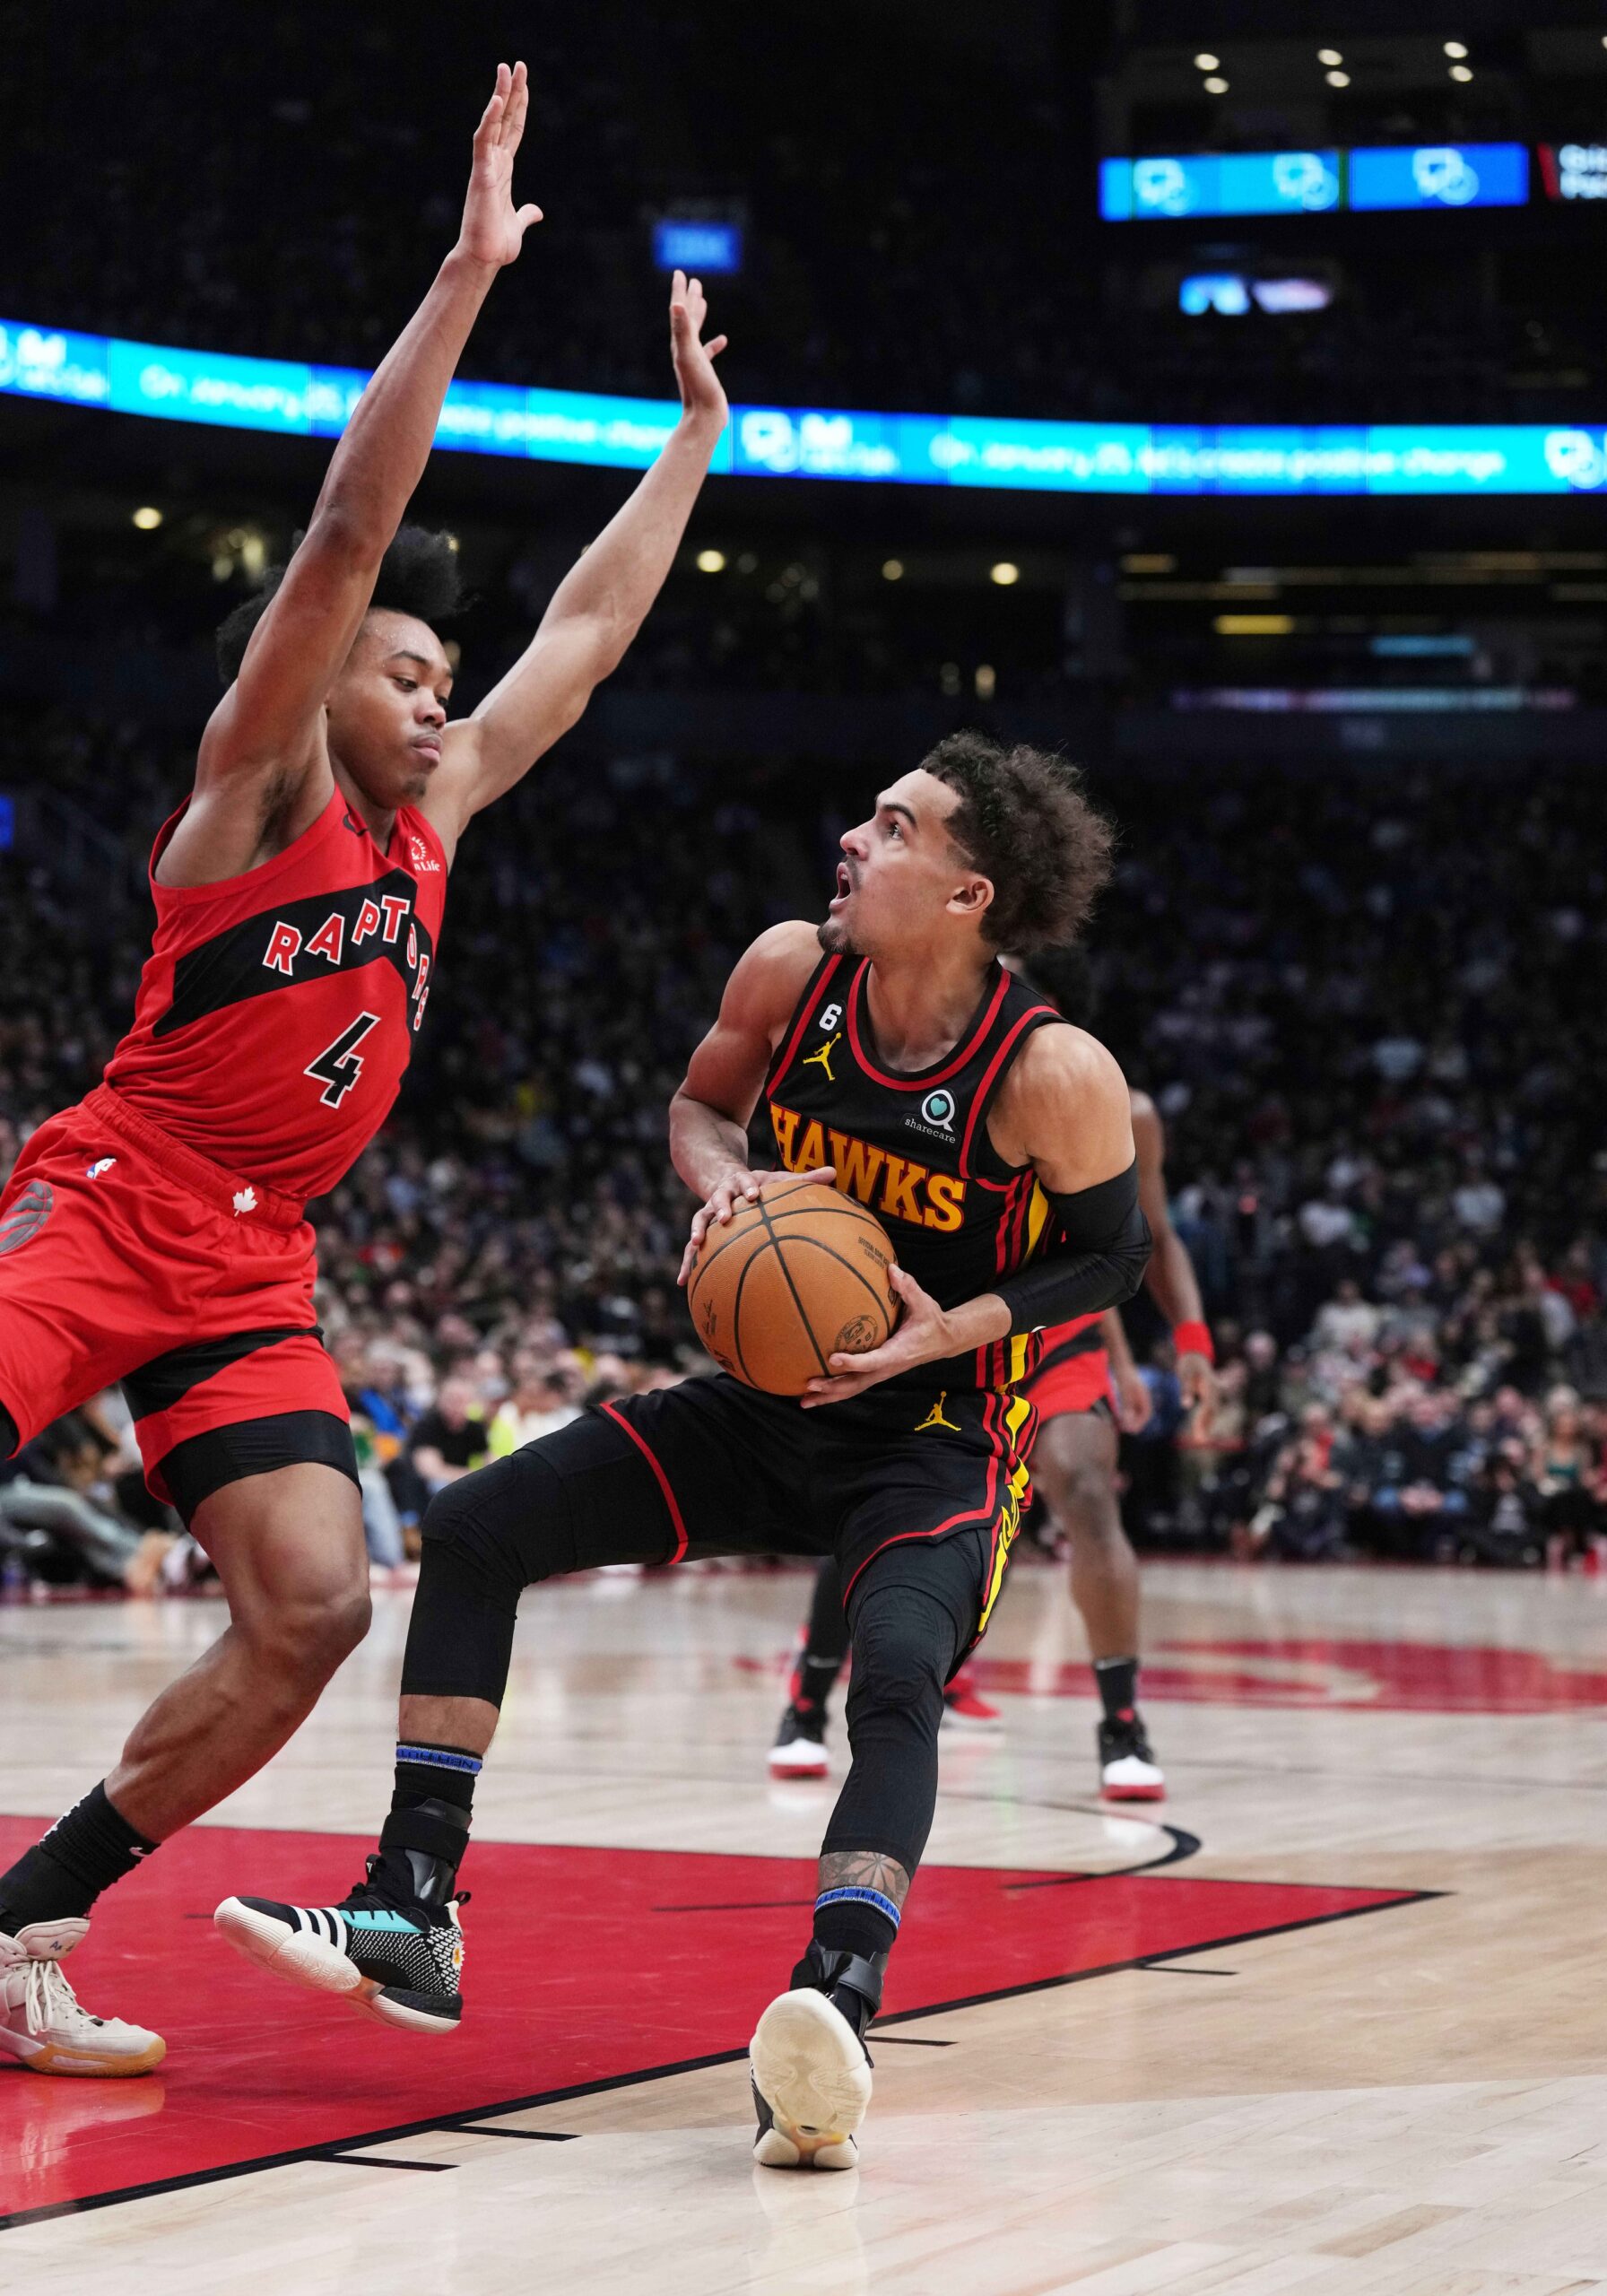 Jan 14, 2023; Toronto, Ontario, CAN; Atlanta Hawks guard Trae Young (11) controls the ball as Toronto Raptors forward Scottie Barnes (4) tries to defend during the second quarter at the Scotiabank Arena against the Toronto Raptors. Mandatory Credit: Nick Turchiaro-USA TODAY Sports